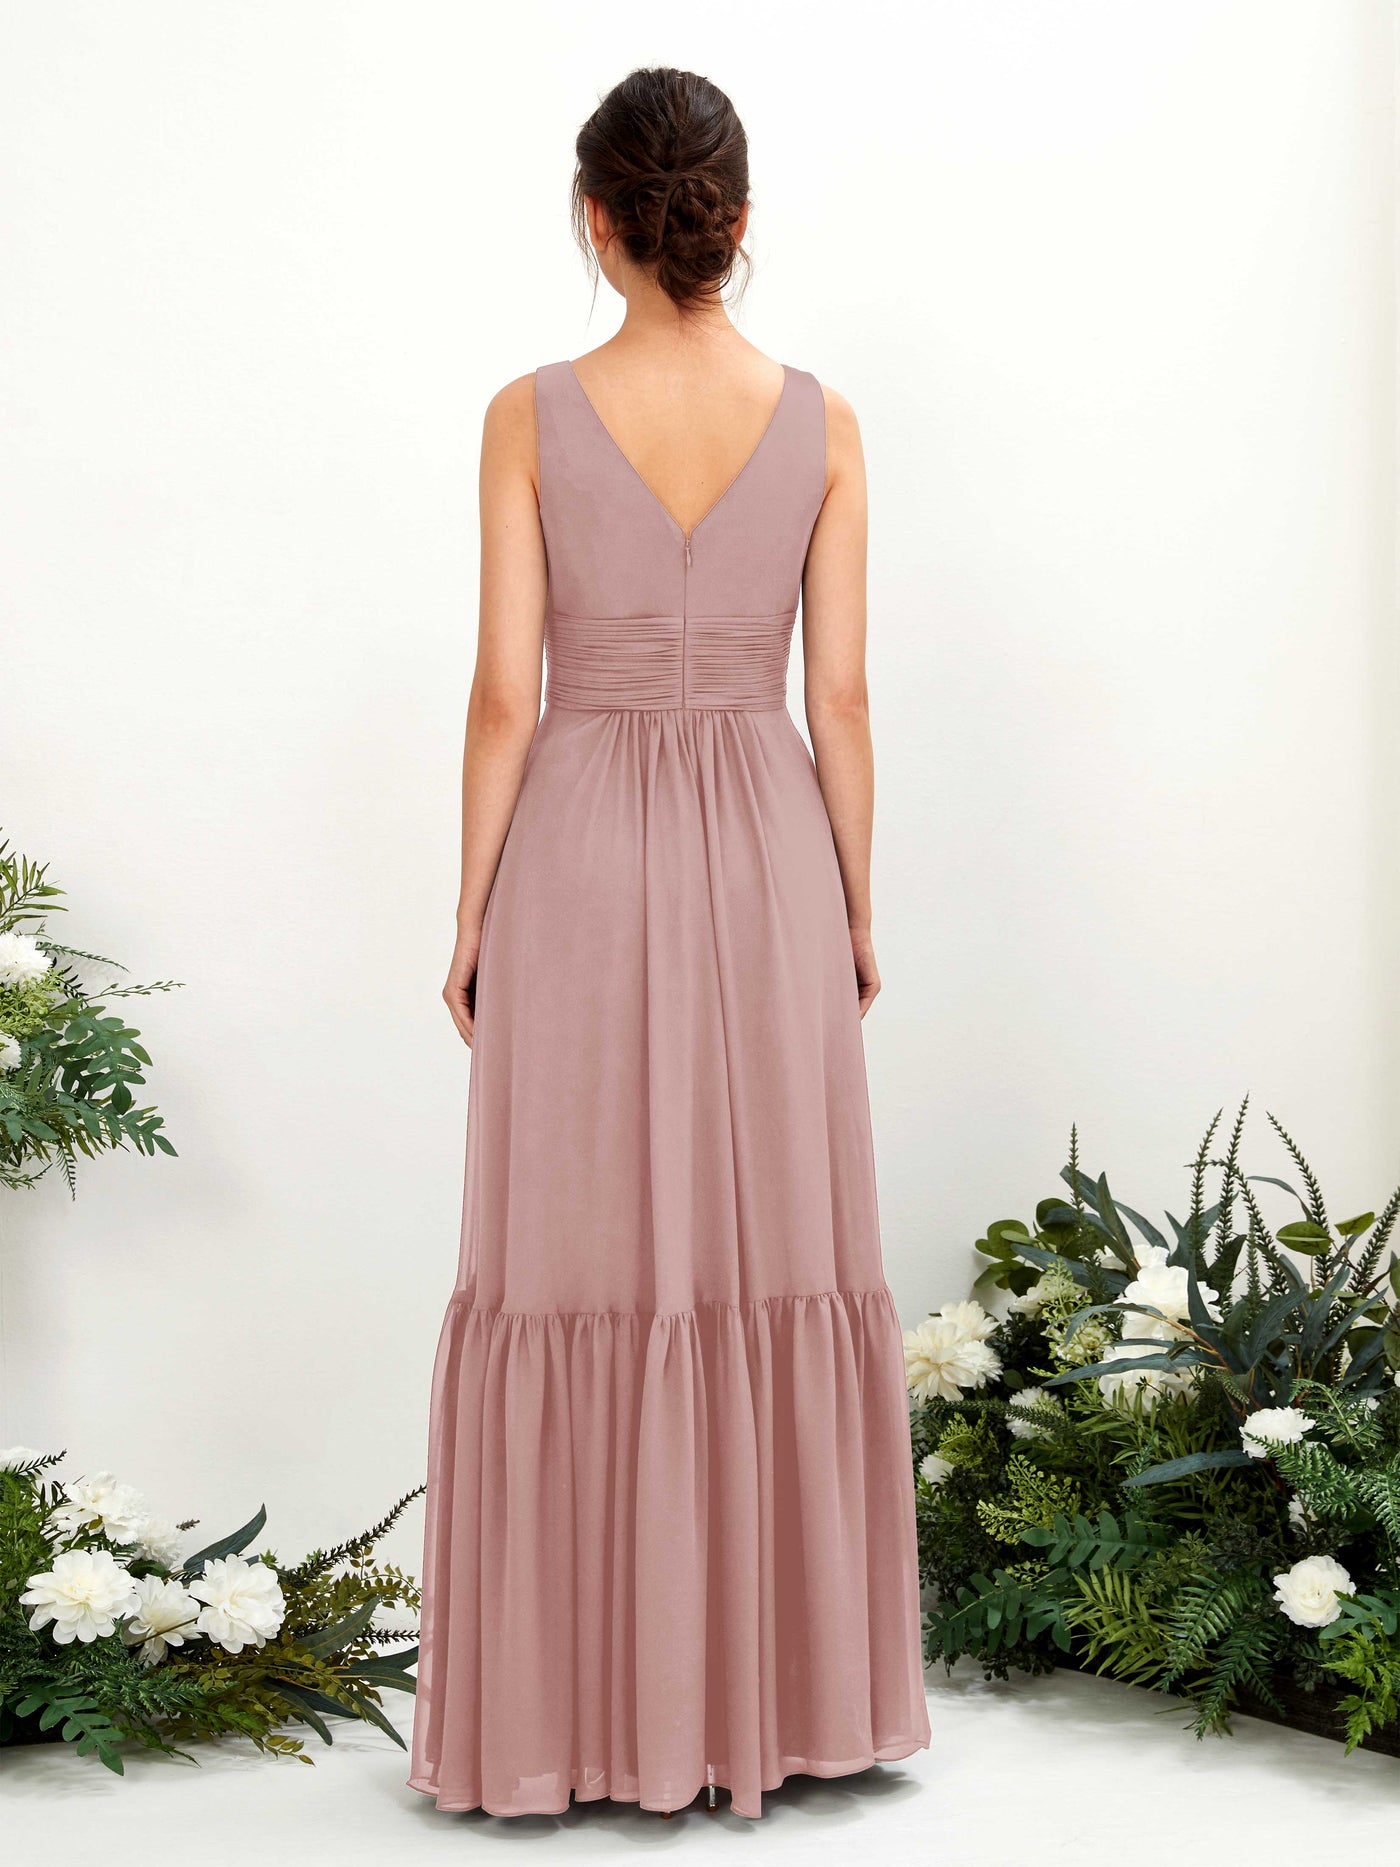 Dusty Rose Bridesmaid Dresses Bridesmaid Dress A-line Chiffon Straps Full Length Sleeveless Wedding Party Dress (80223709)#color_dusty-rose